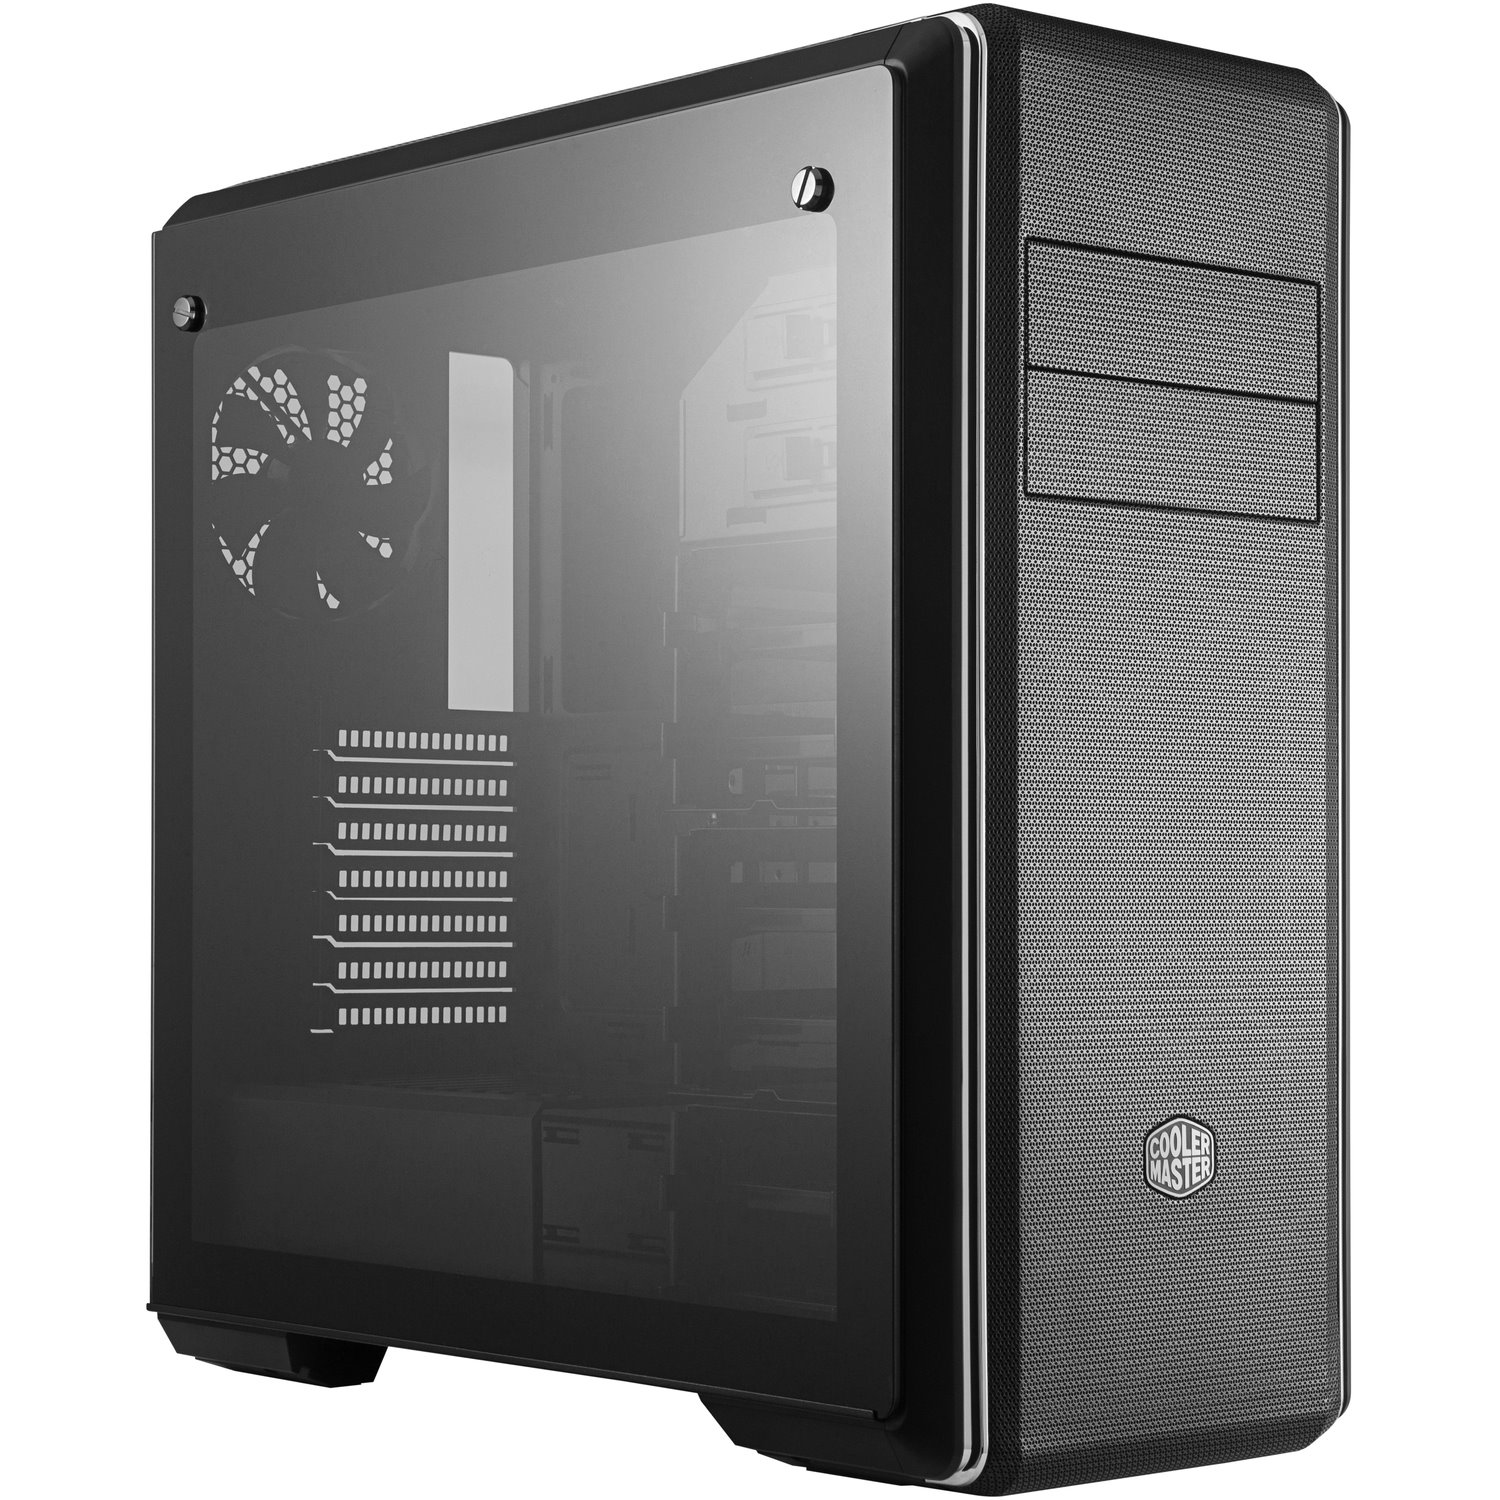 Cooler Master MasterBox MCB-CM694-KG5N-S00 Computer Case - Mini ITX, Micro ATX, ATX, EATX Motherboard Supported - Mid-tower - Steel, Plastic, Tempered Glass, Mesh - Black